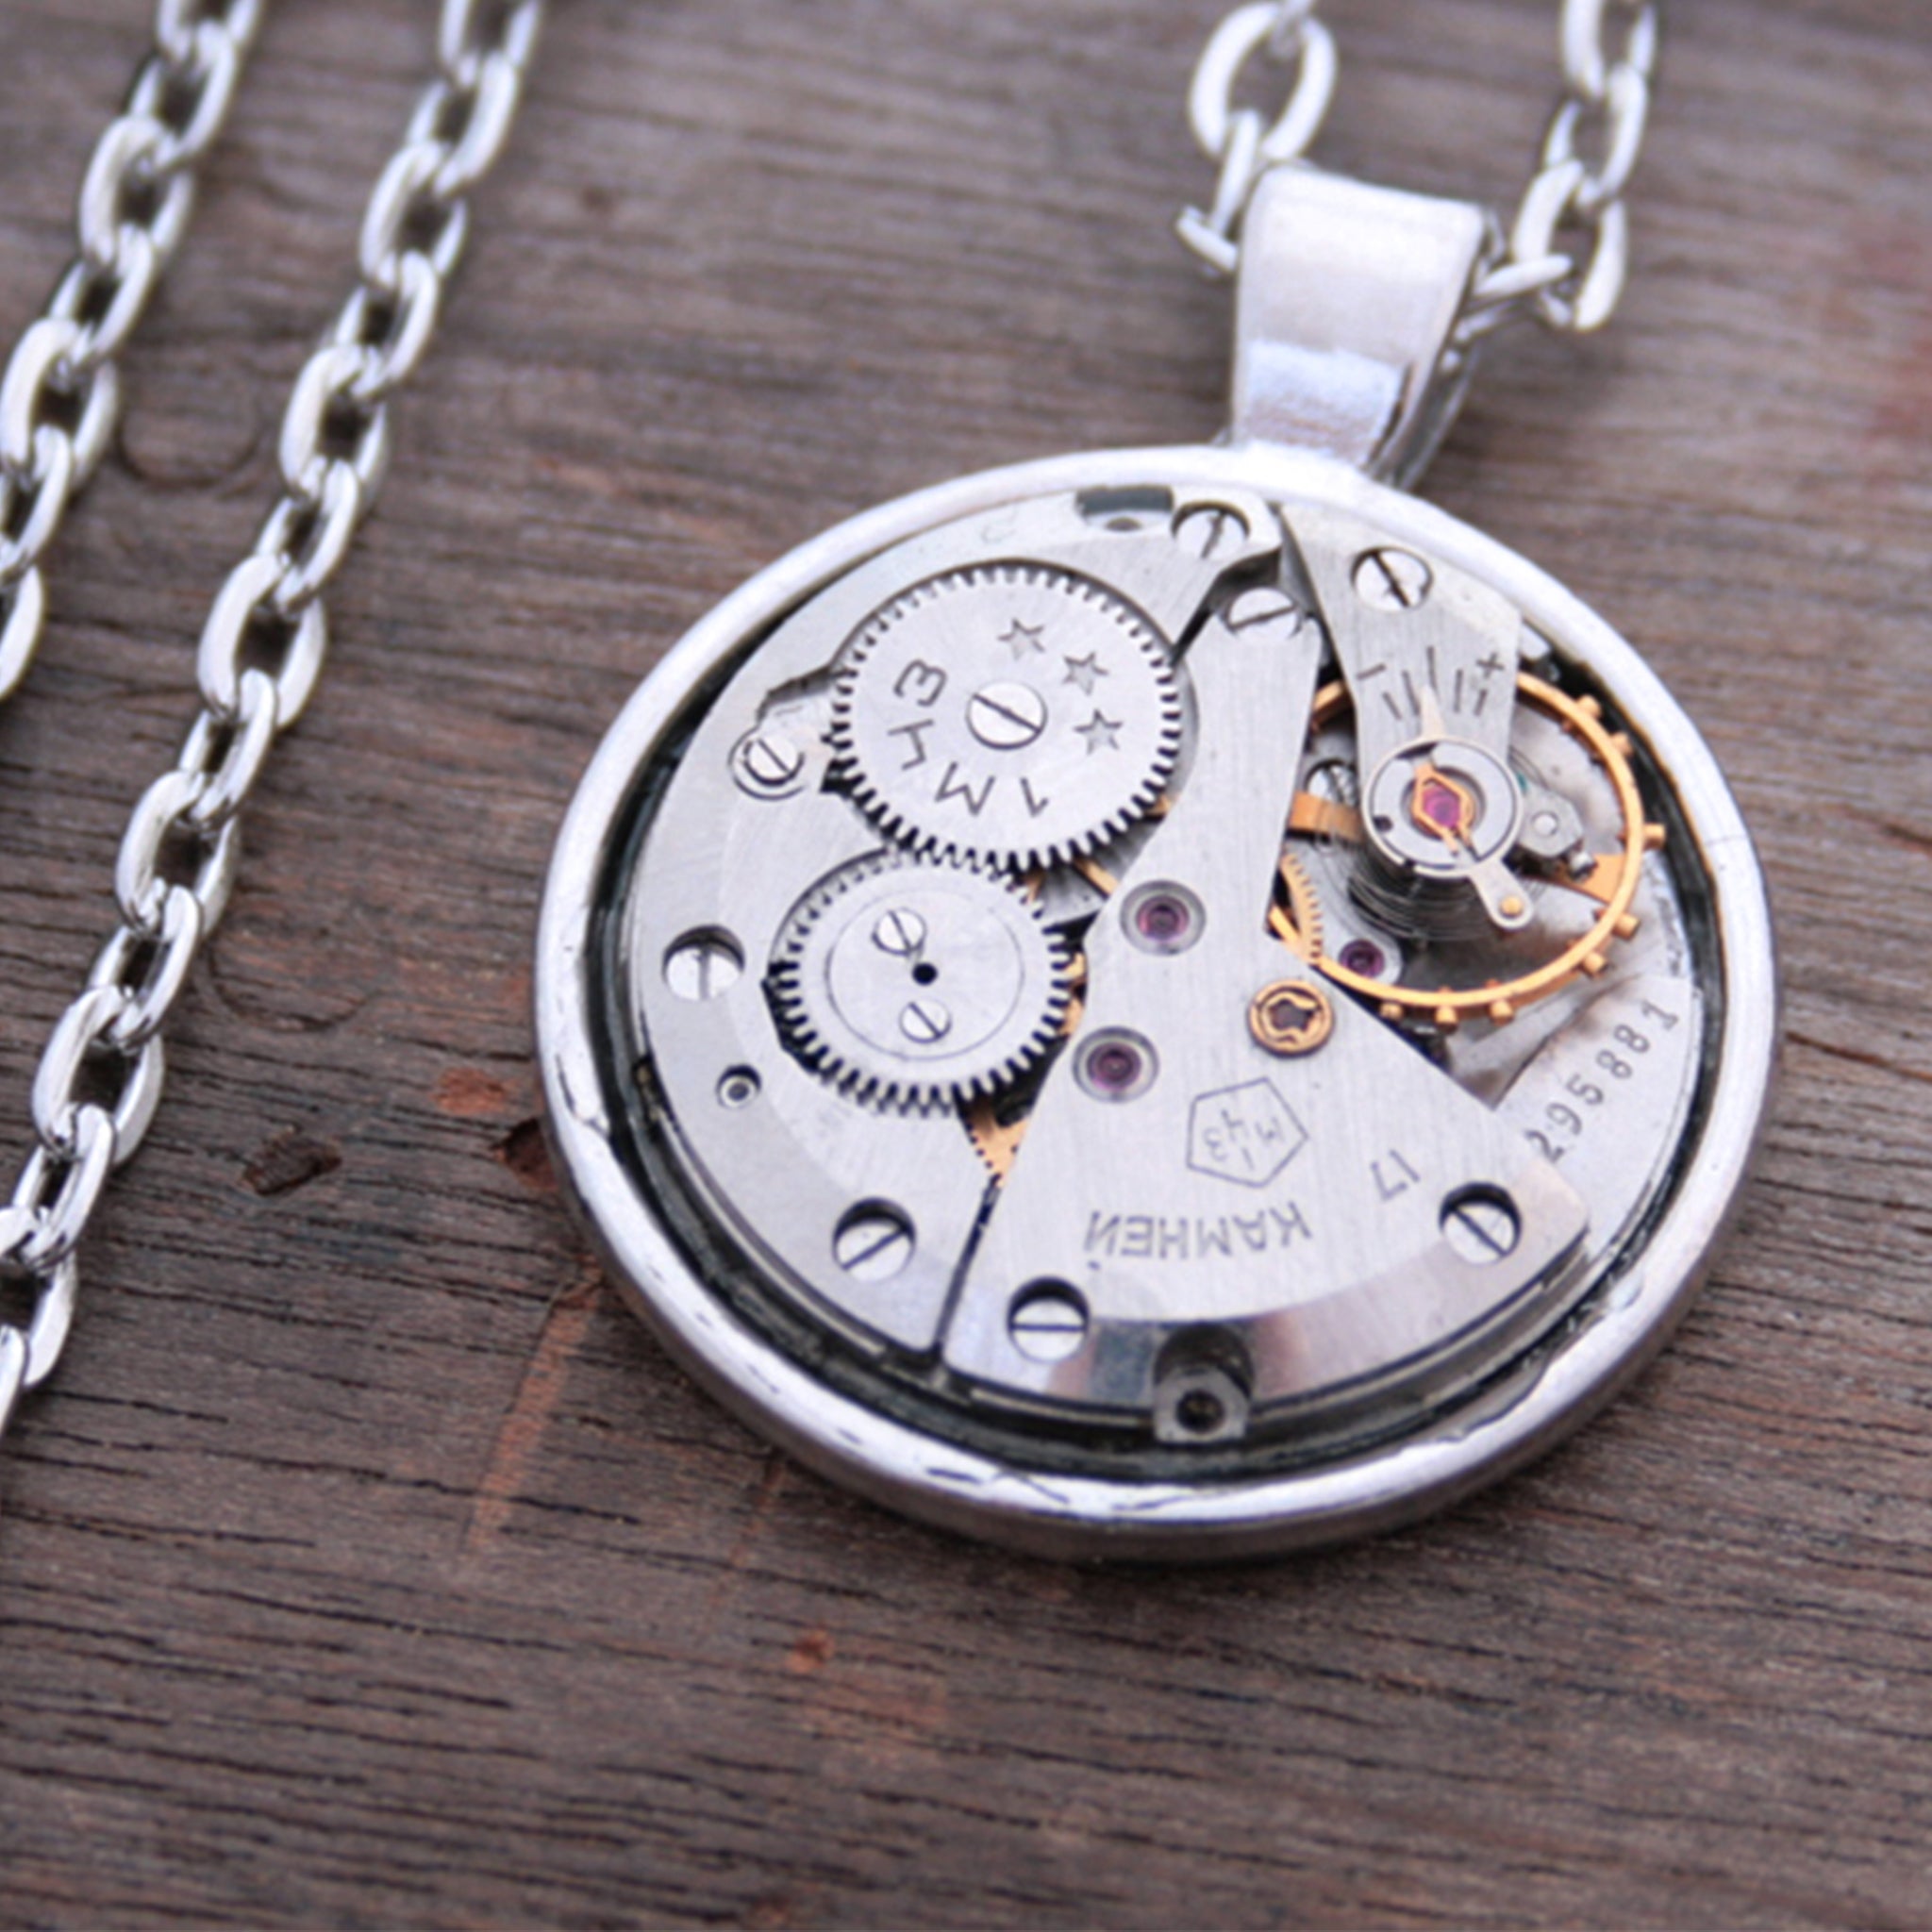 Steampunk Necklace made of watch mechanism